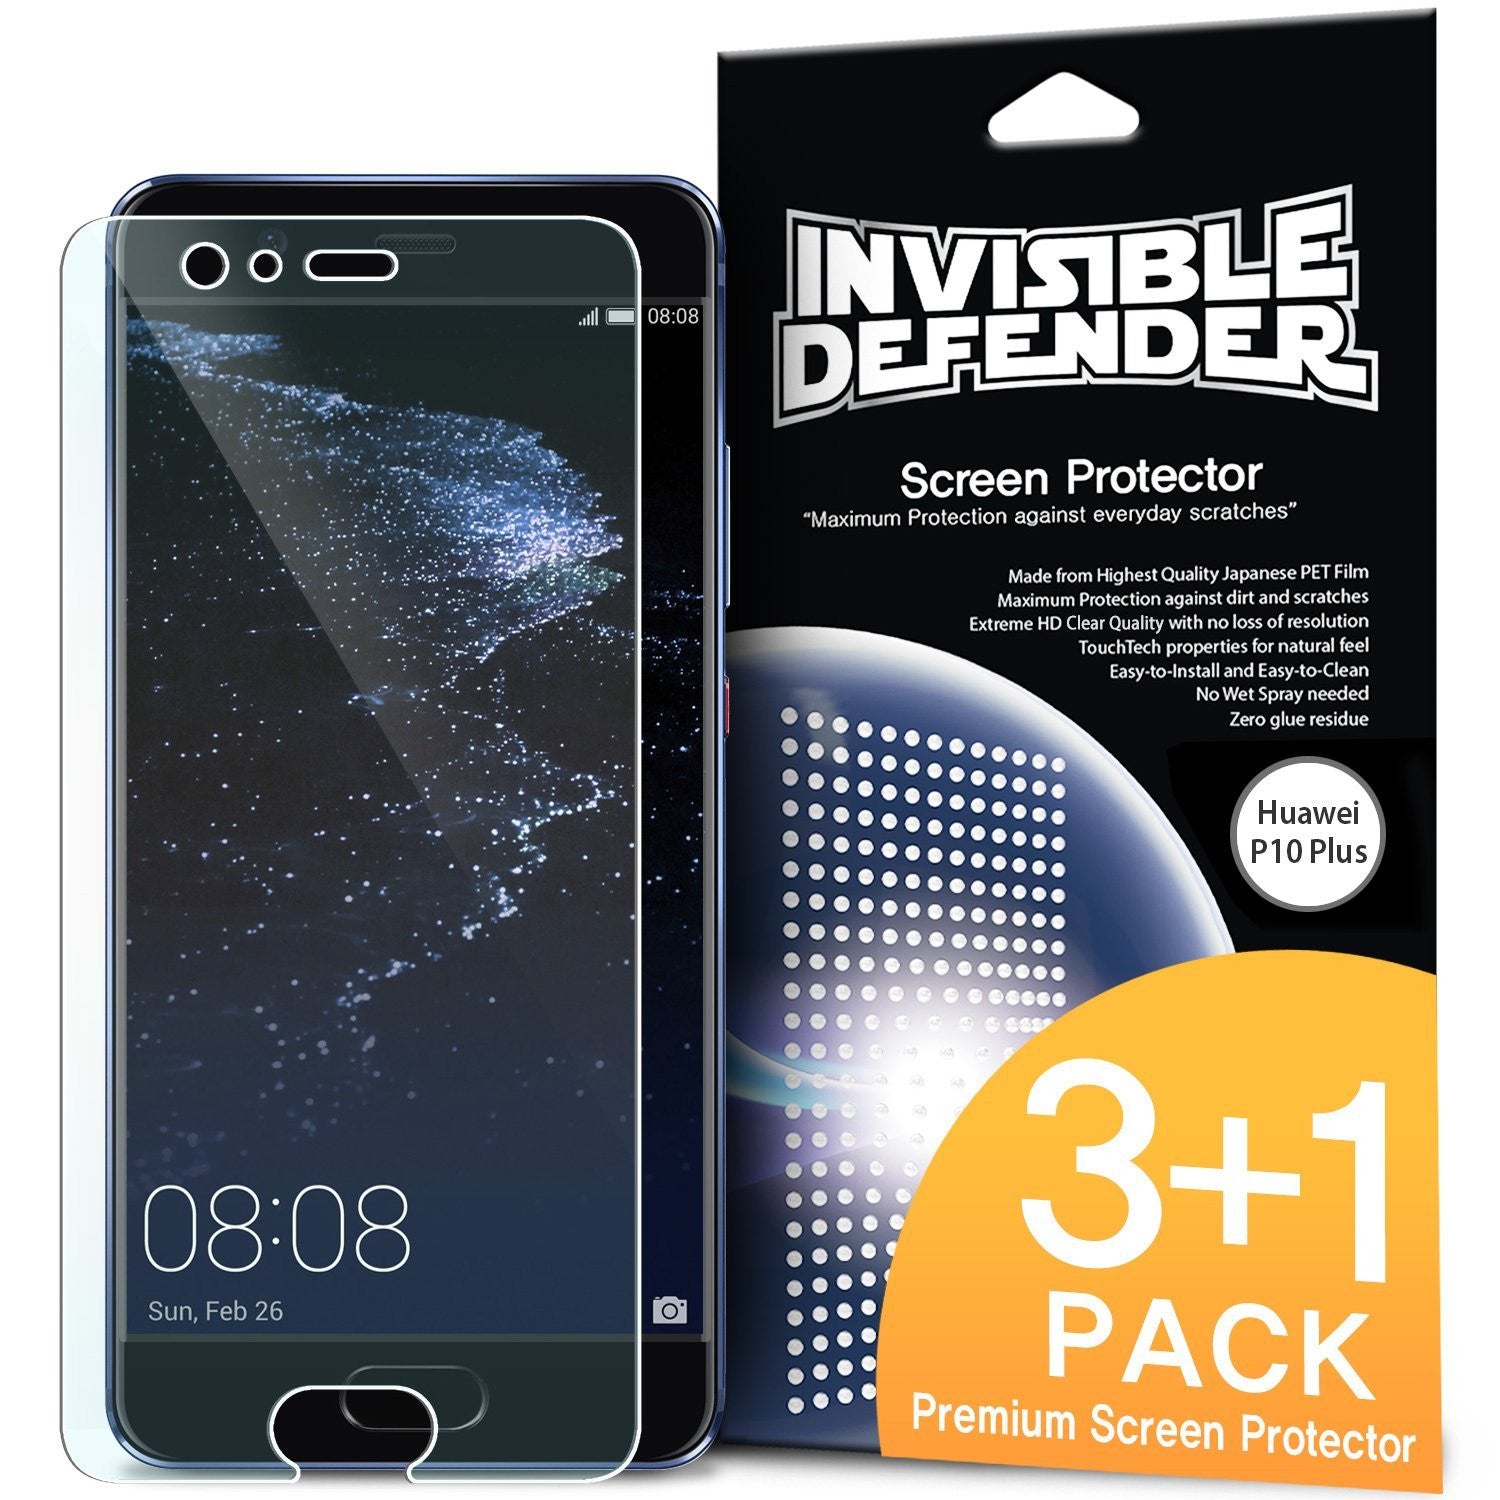 huawei p10 plus ringke invisible defender 4 pack hd clearness screen protector